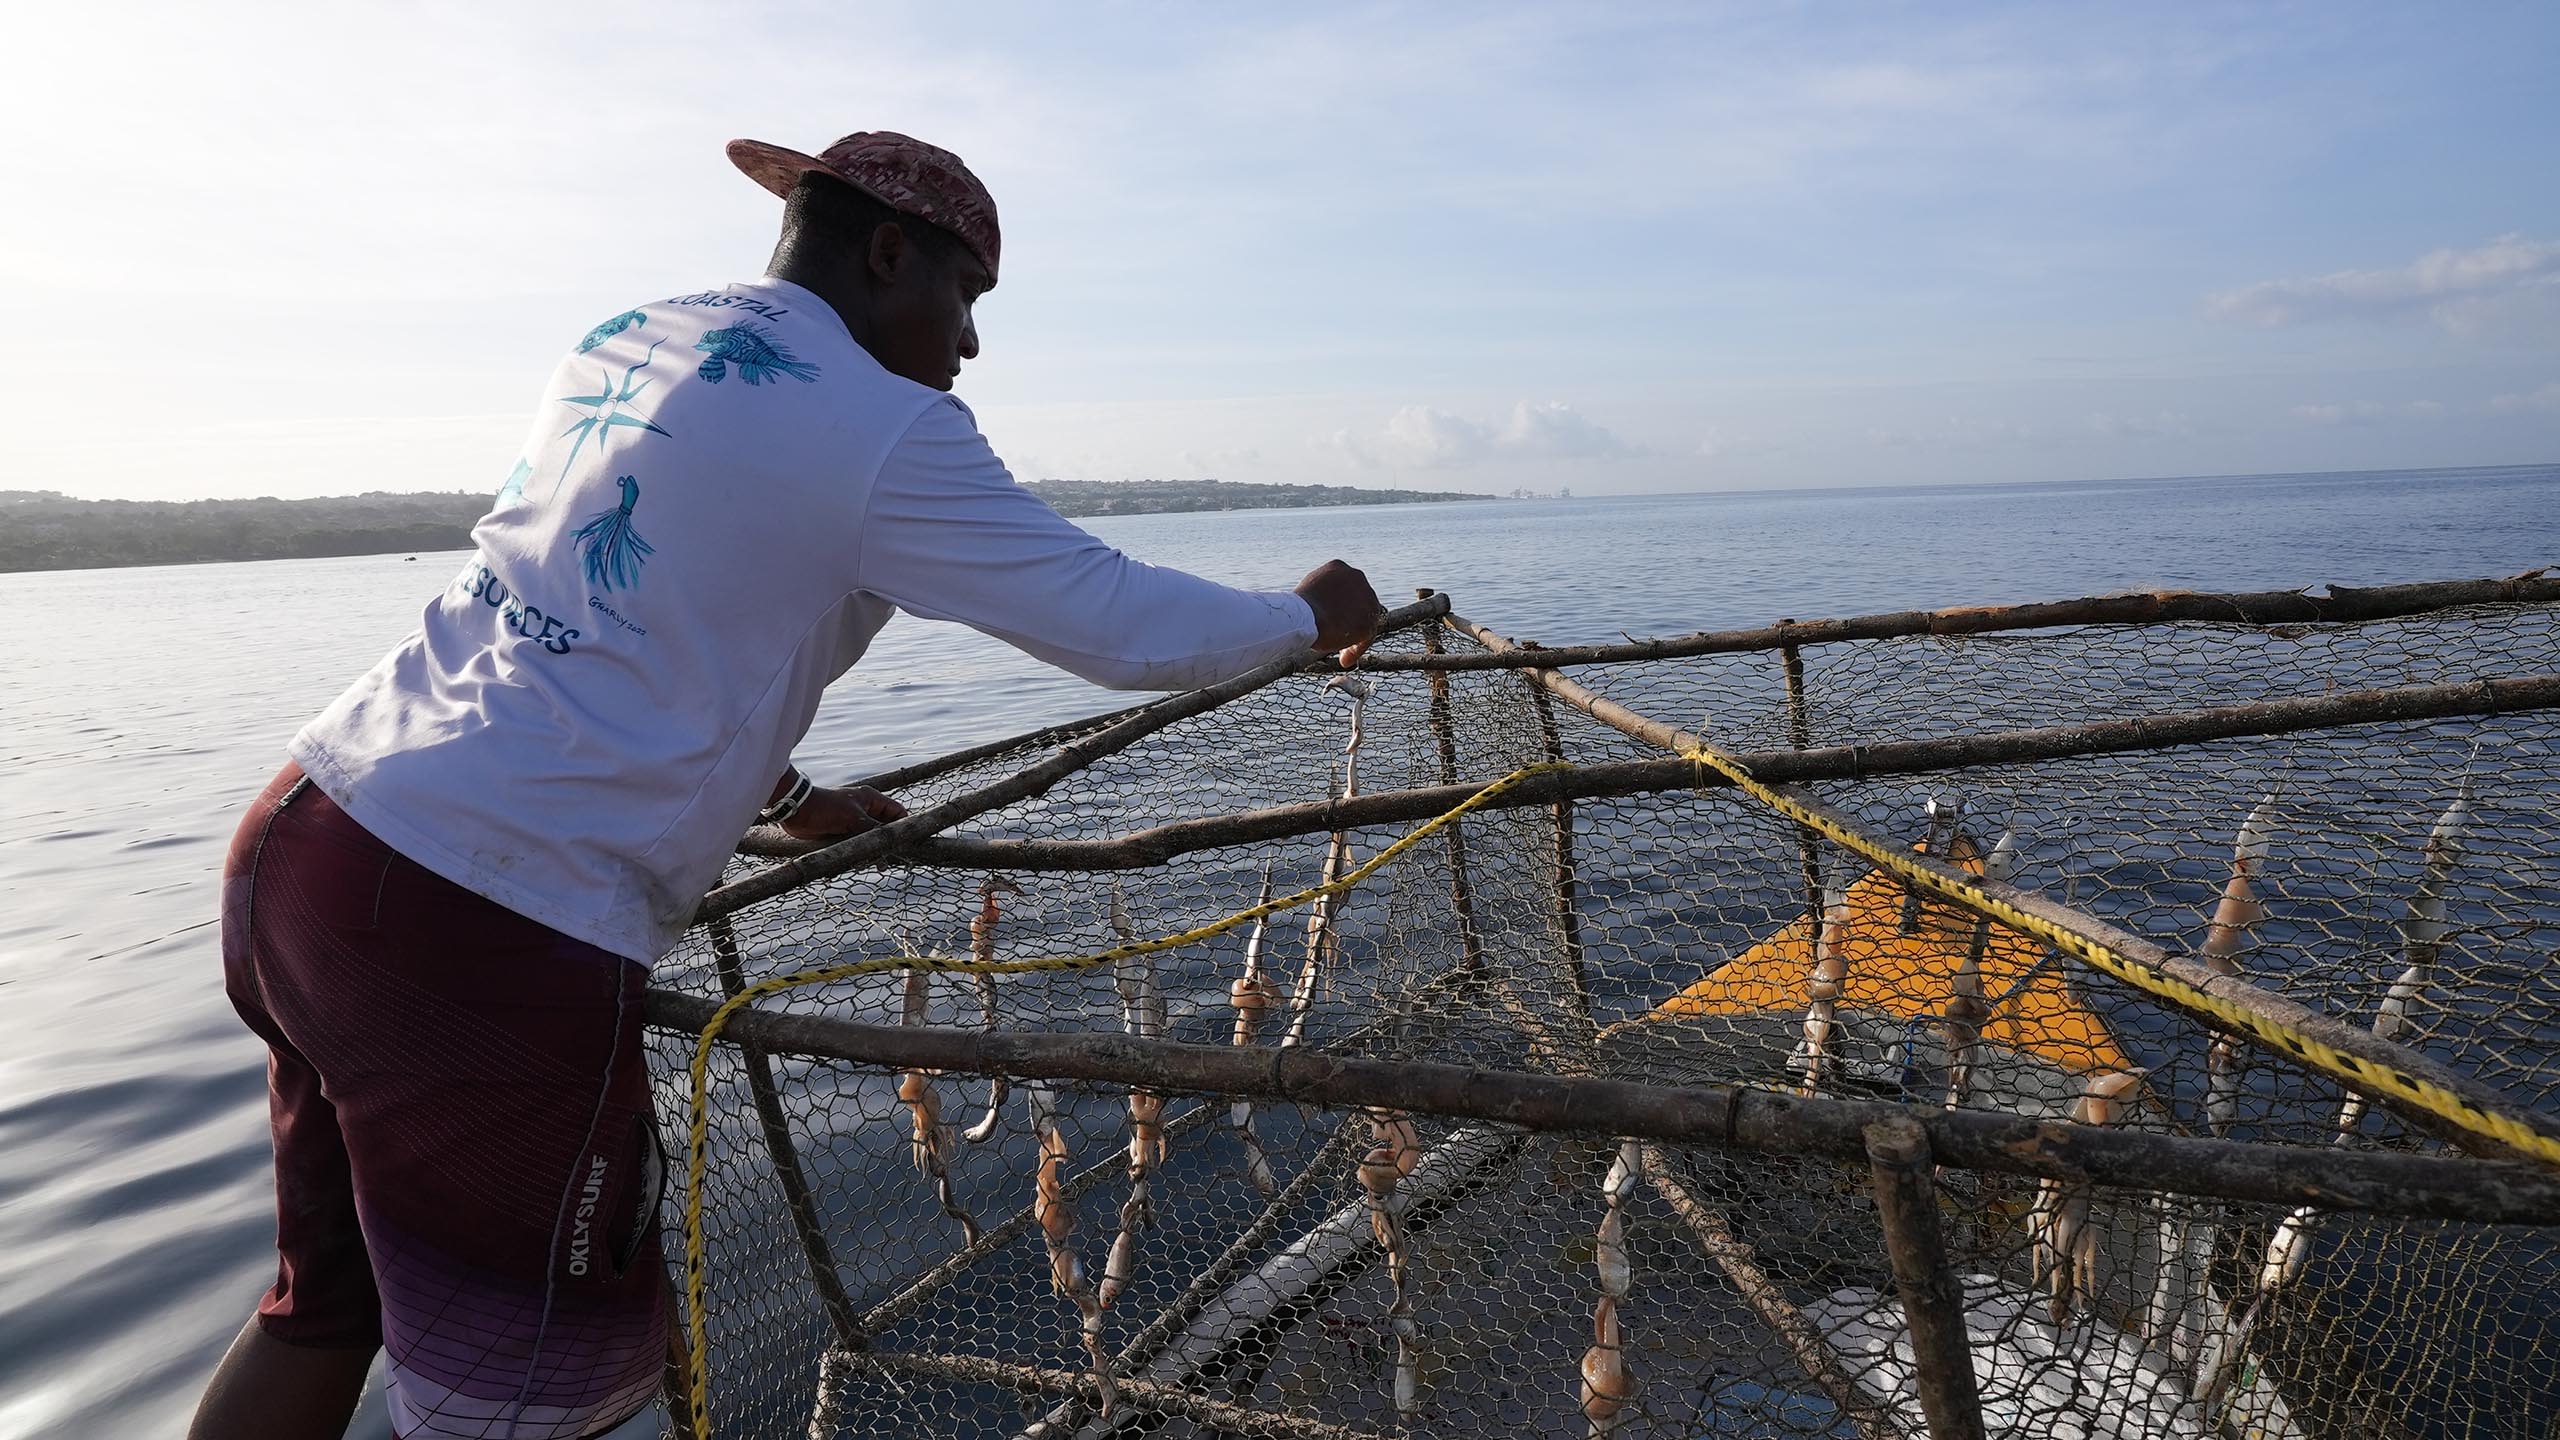 In addition to spearfishing, Ferguson uses traditional fish traps to increase his bounty.